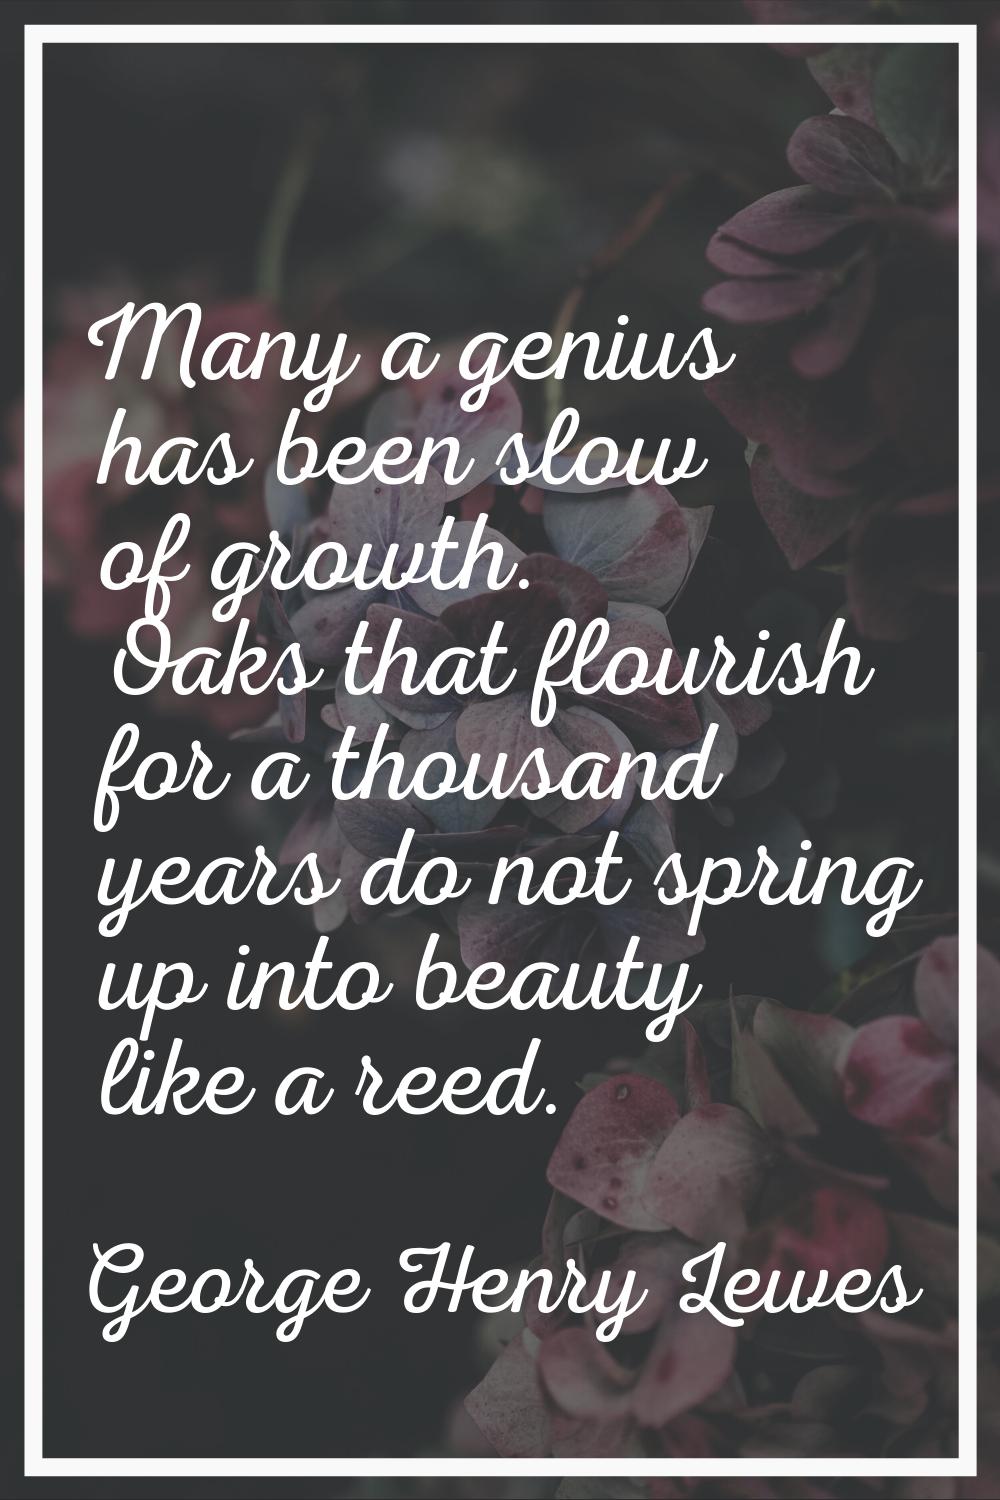 Many a genius has been slow of growth. Oaks that flourish for a thousand years do not spring up int